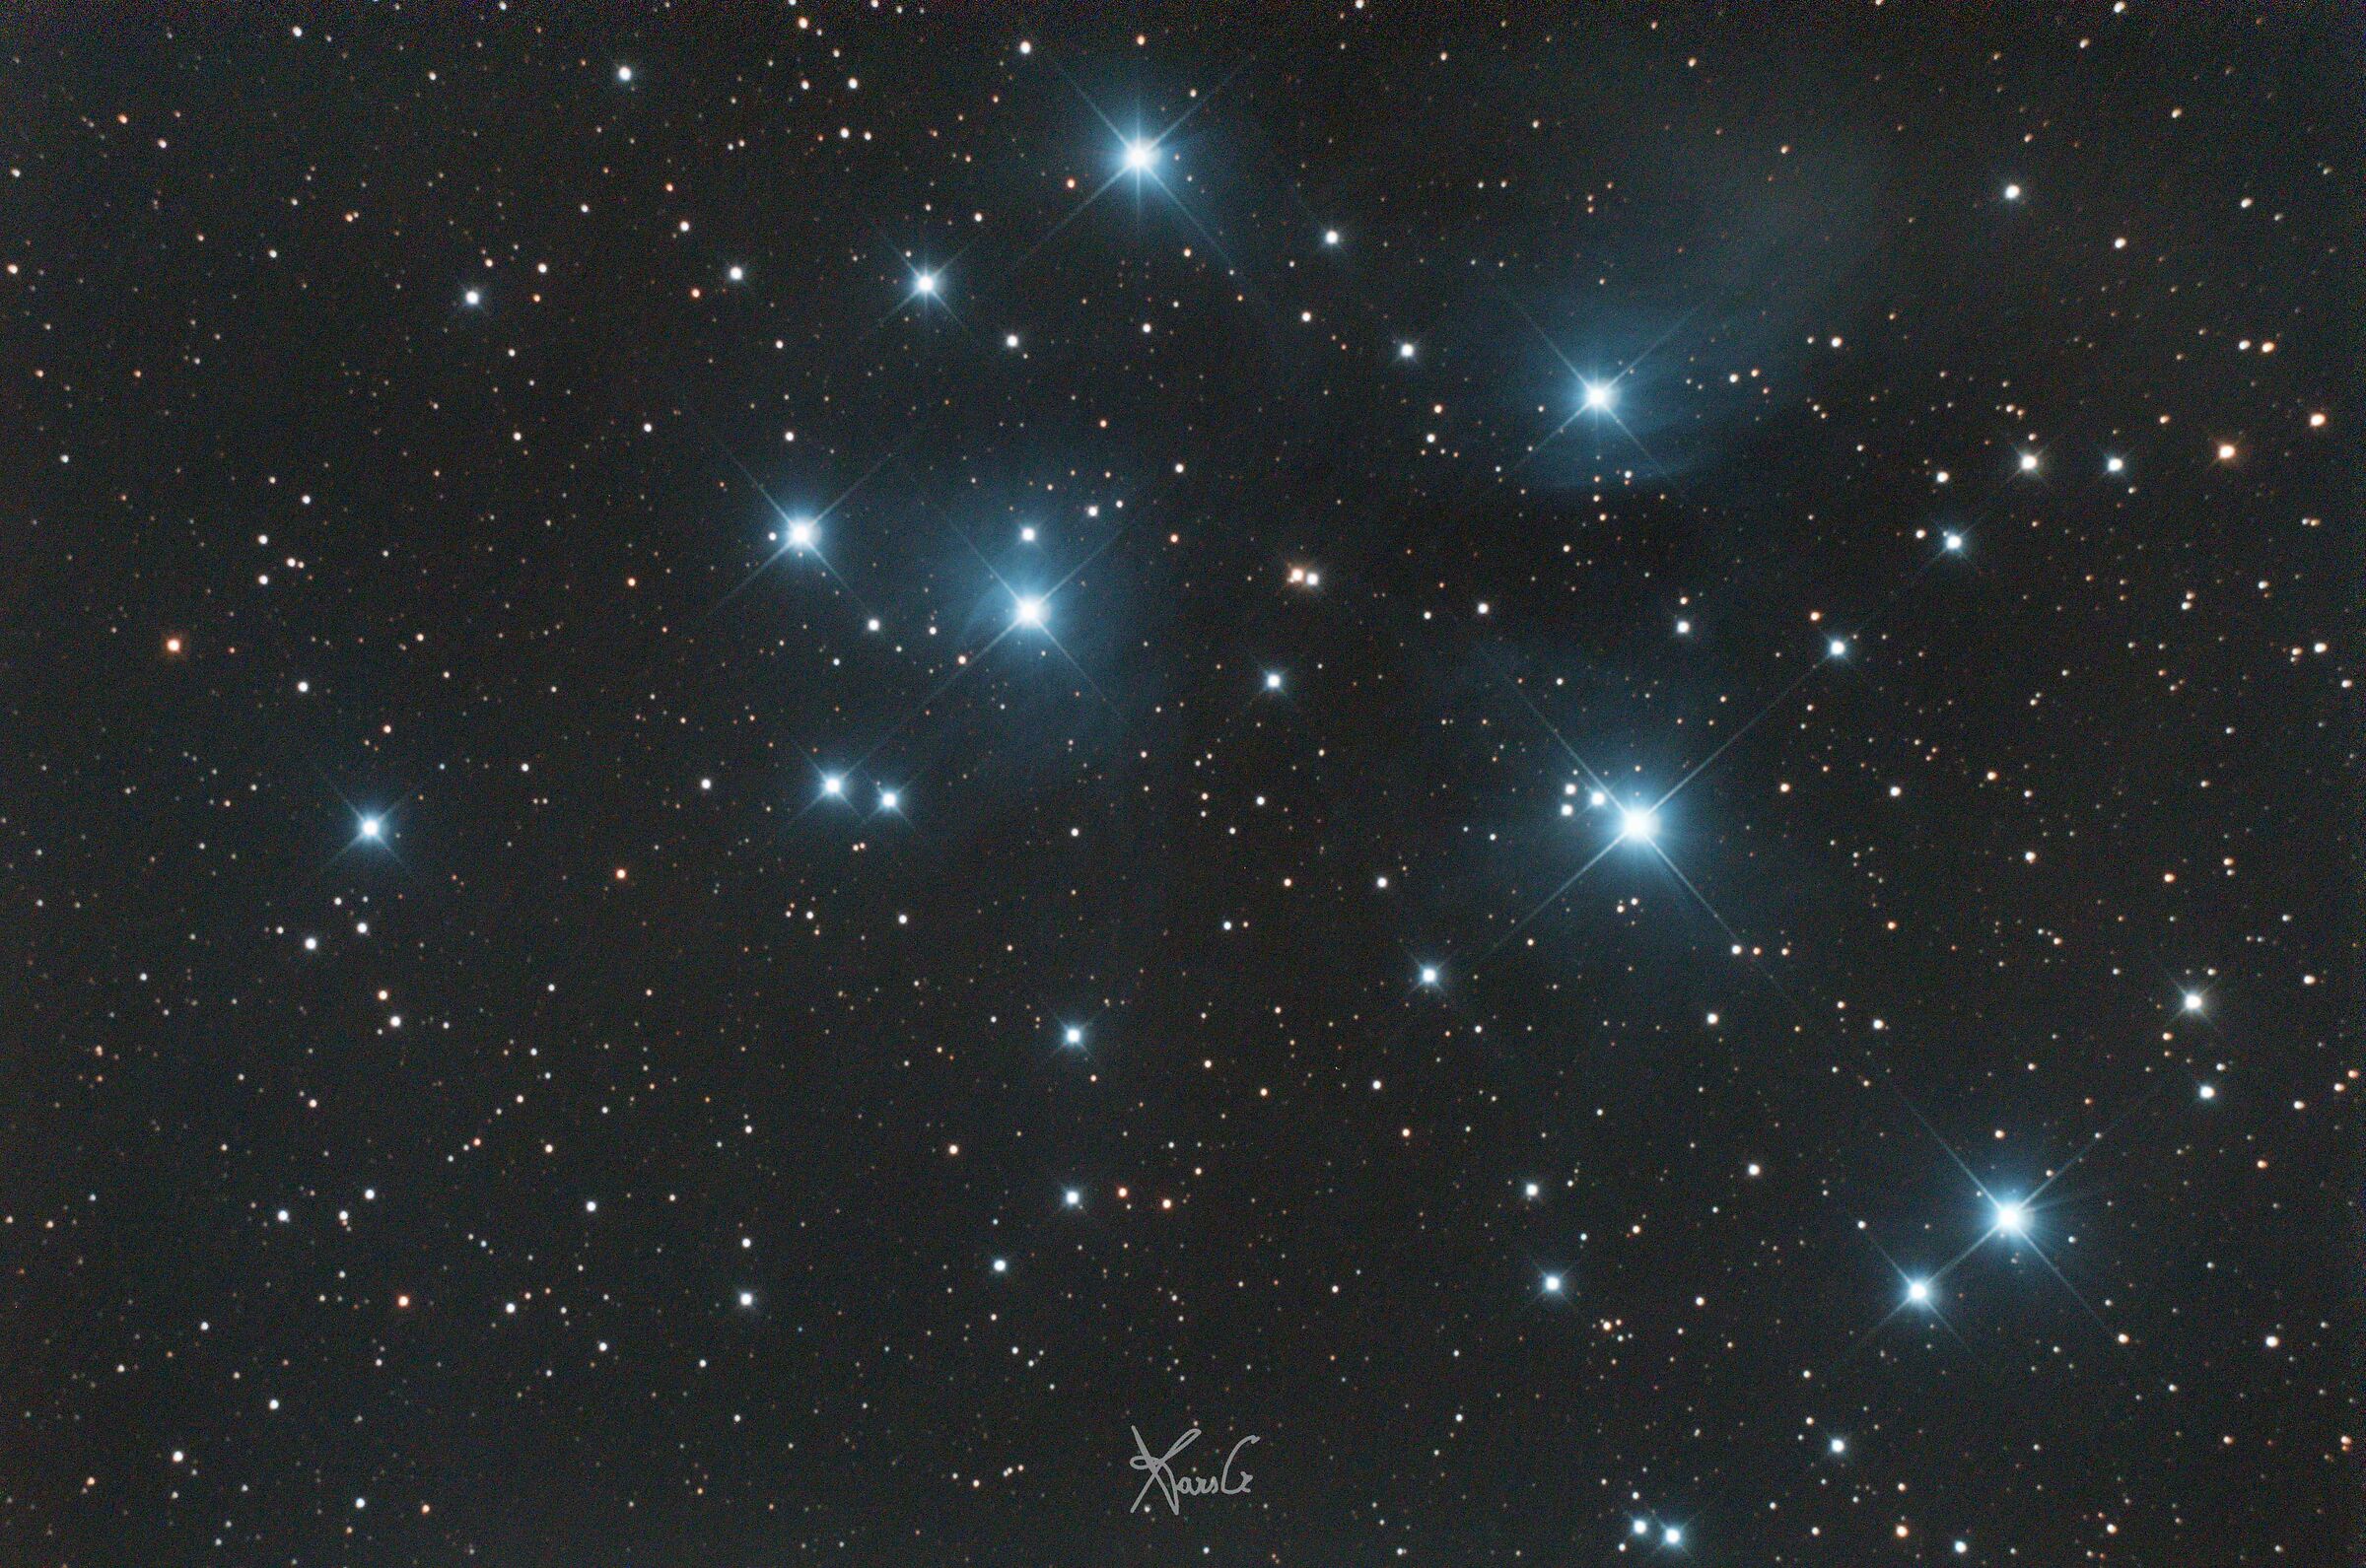 M45 on the evening of the eve ...